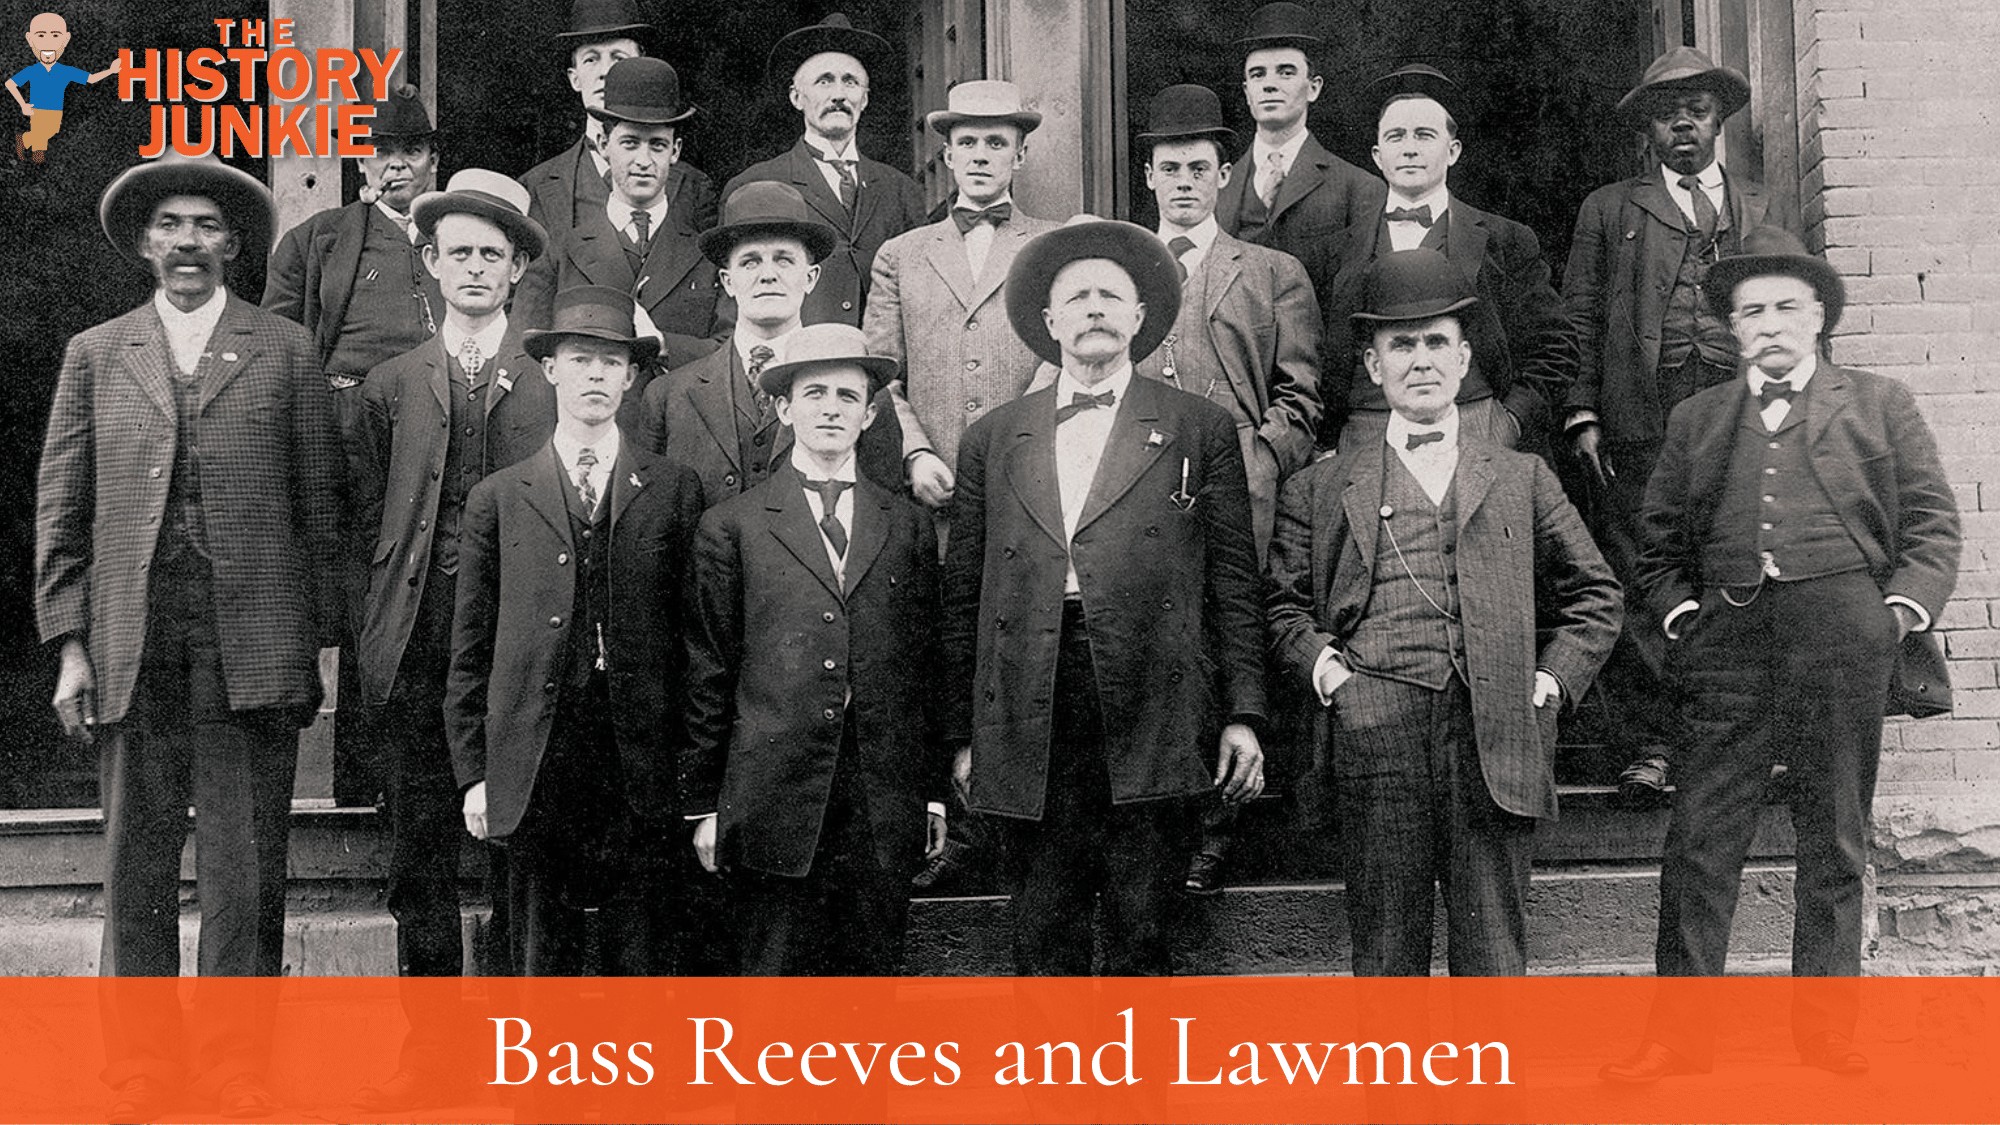 Bass Reeves and Lawmen